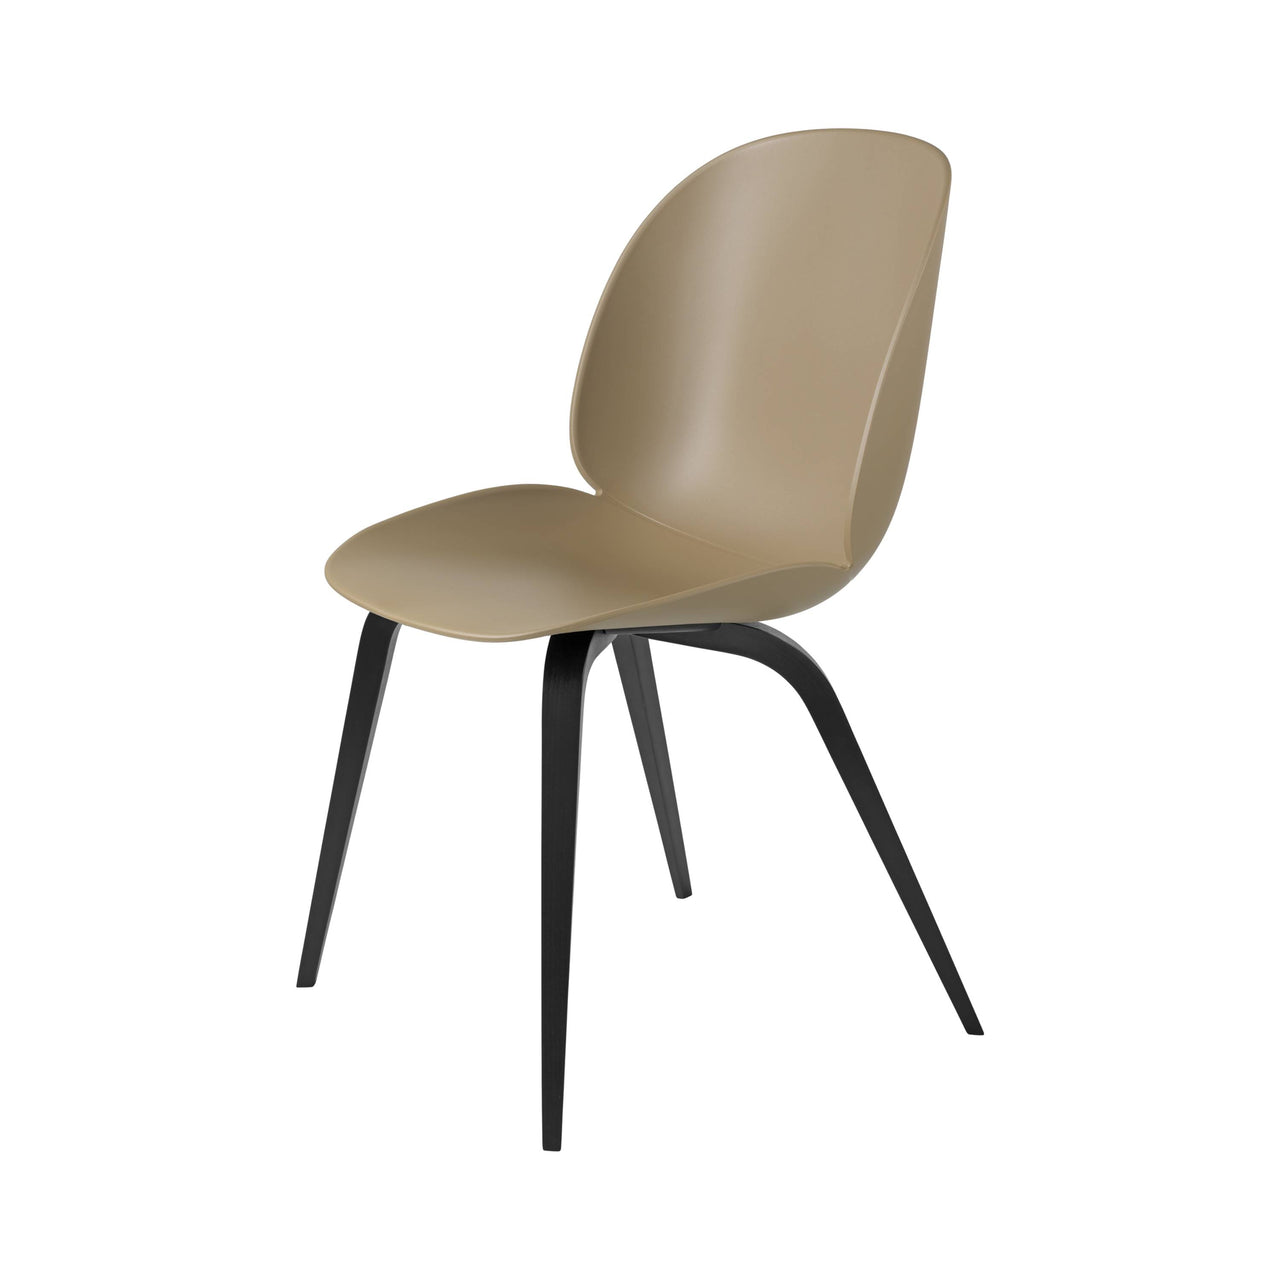 Beetle Dining Chair: Wood Base + Pebble Brown + Black Stained Beech